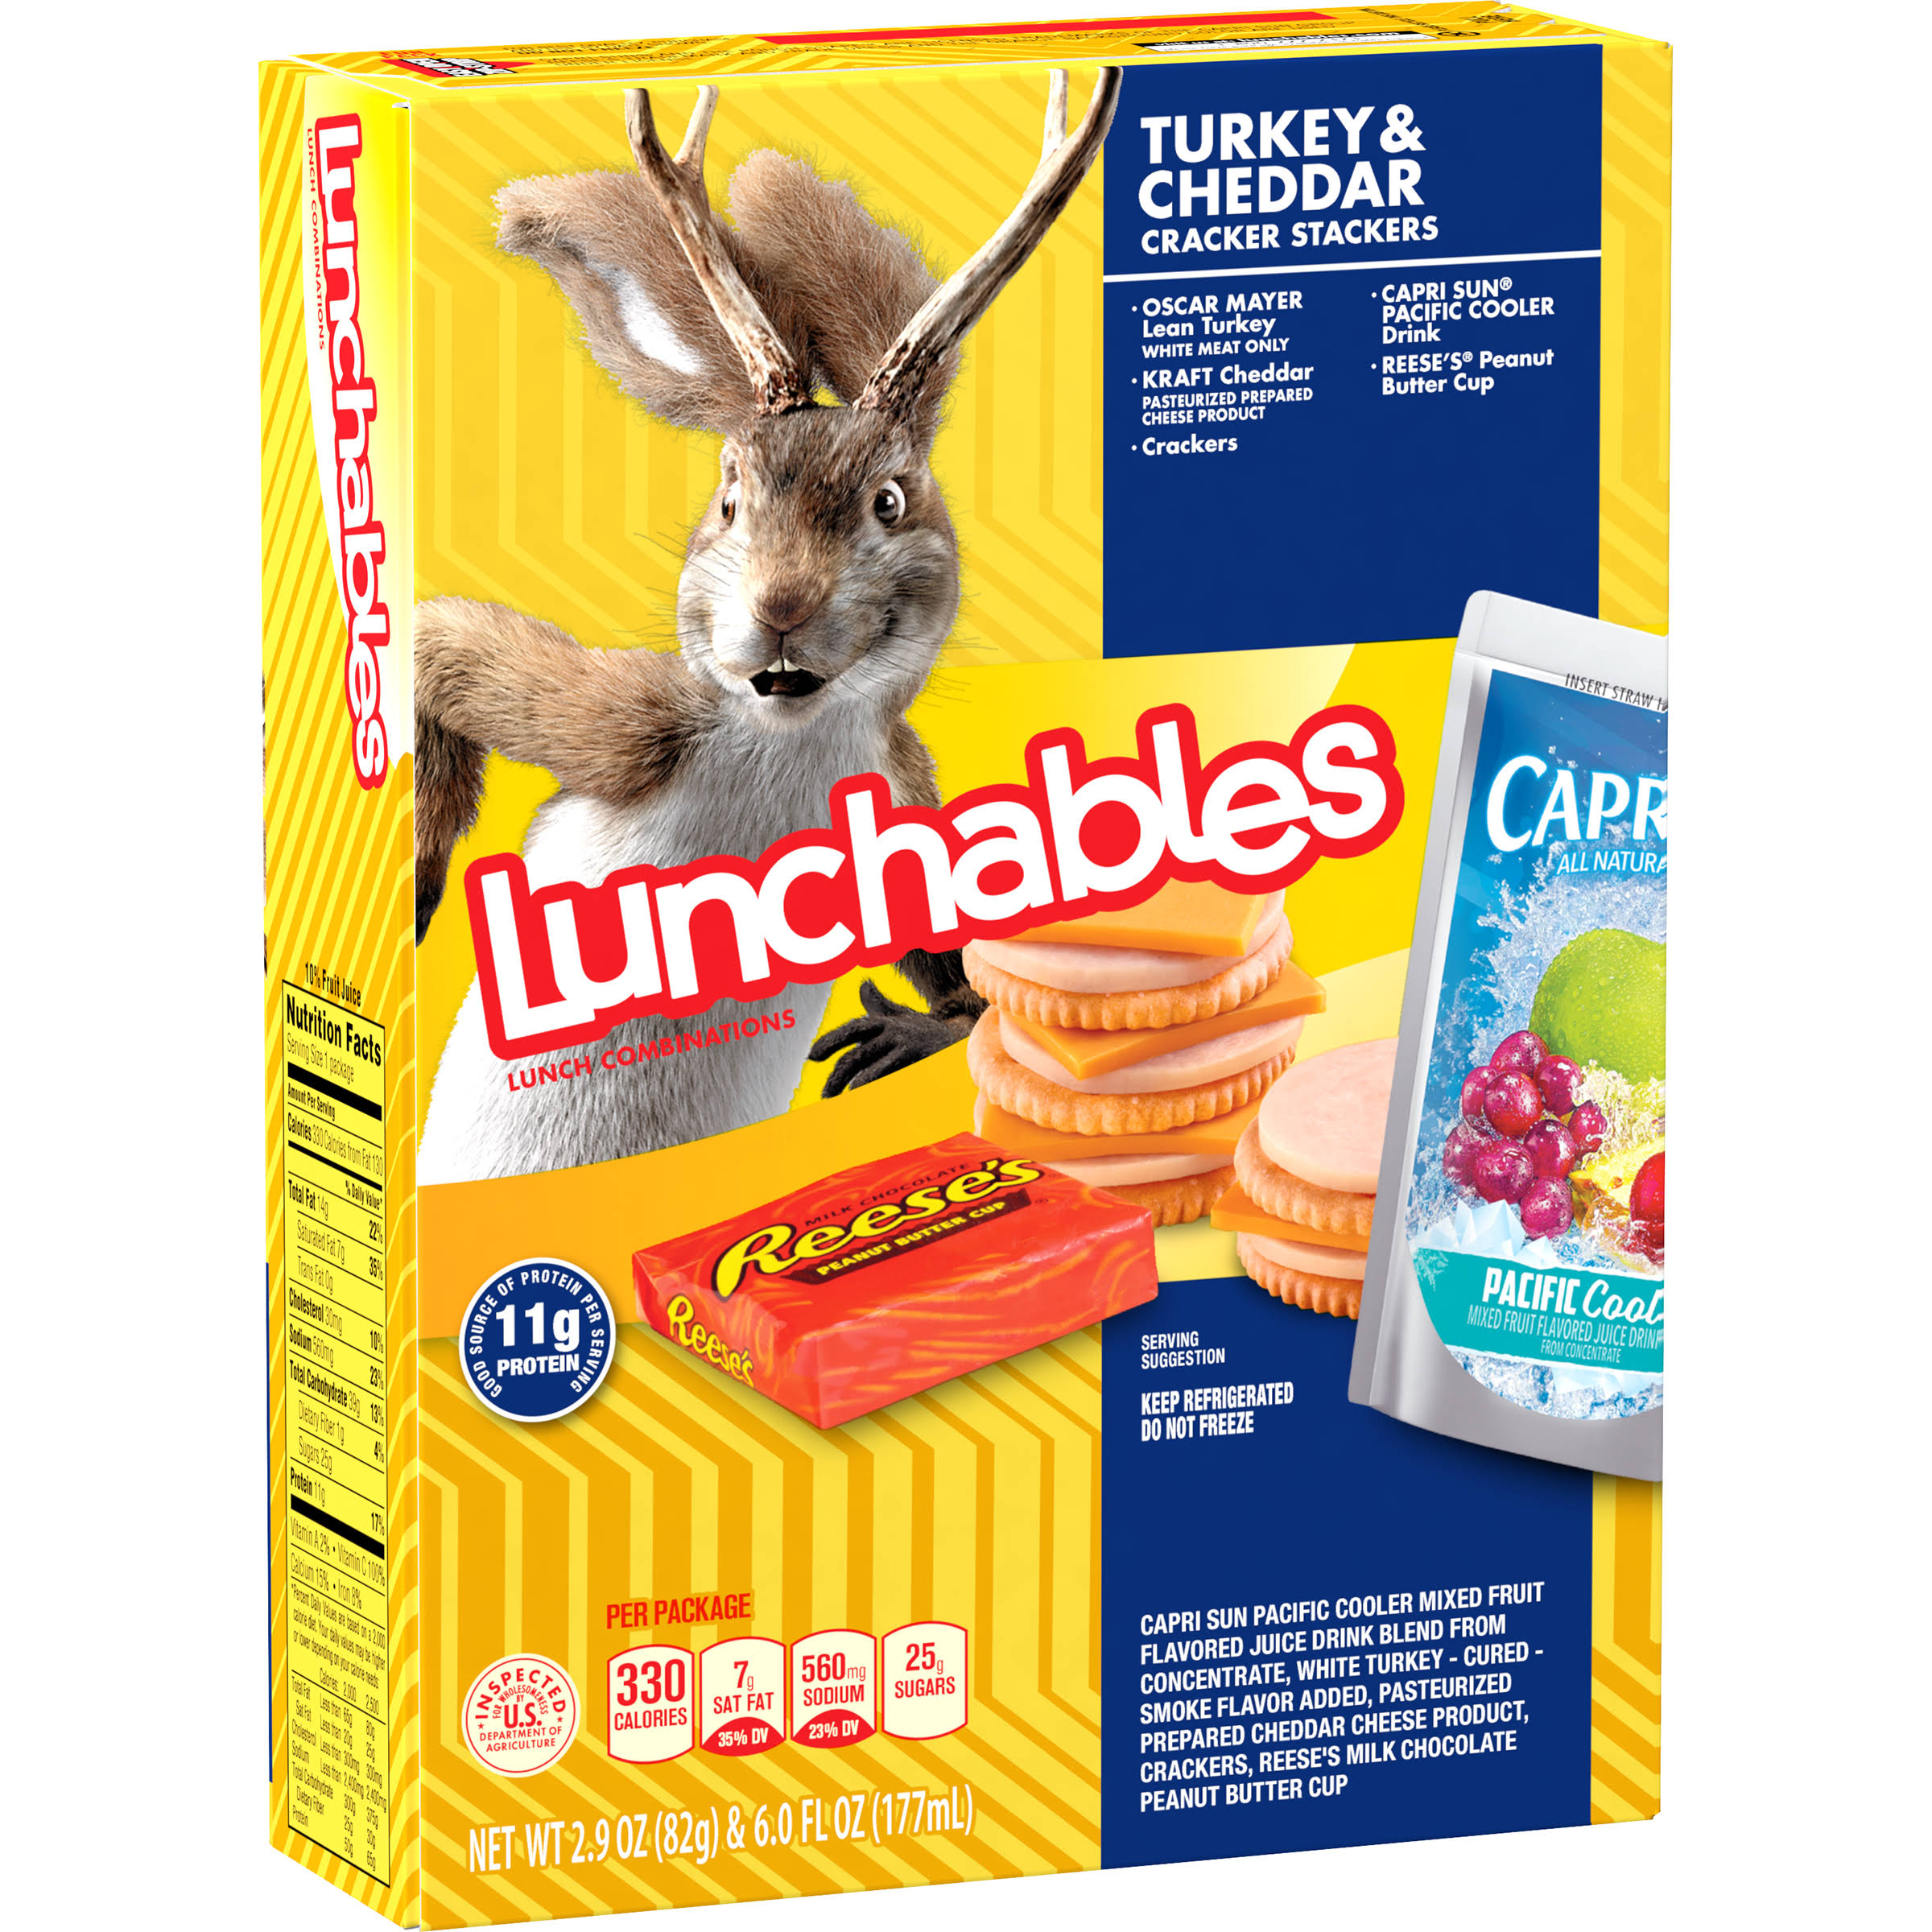 Lunchables Lunch Combinations, Turkey & Cheddar, Cracker Stacker